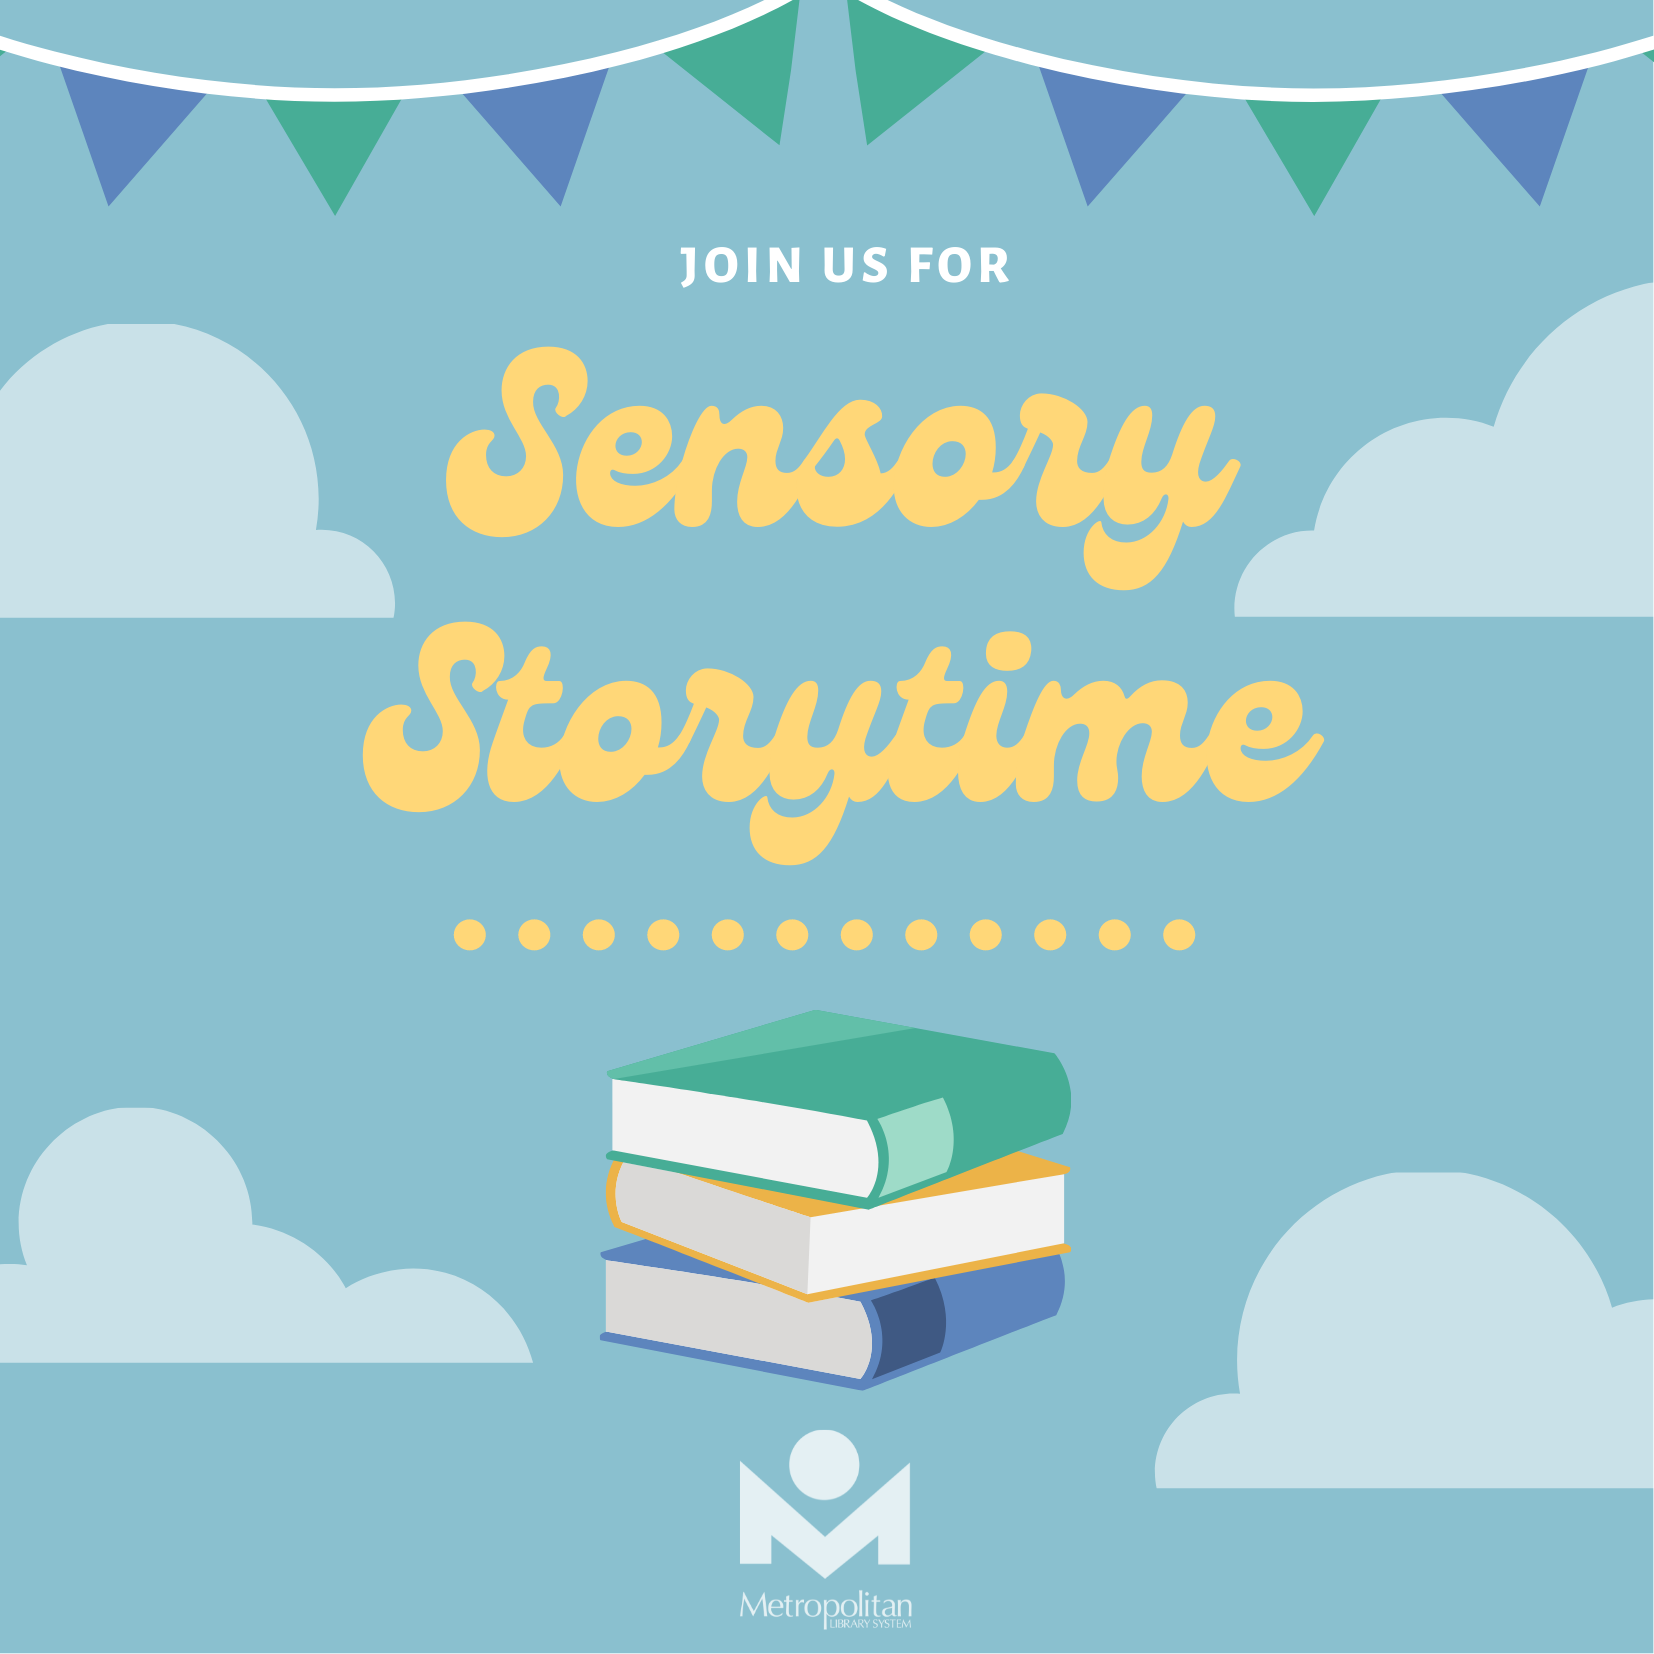 Sensory Storytime logo on blue background with clouds and streamers